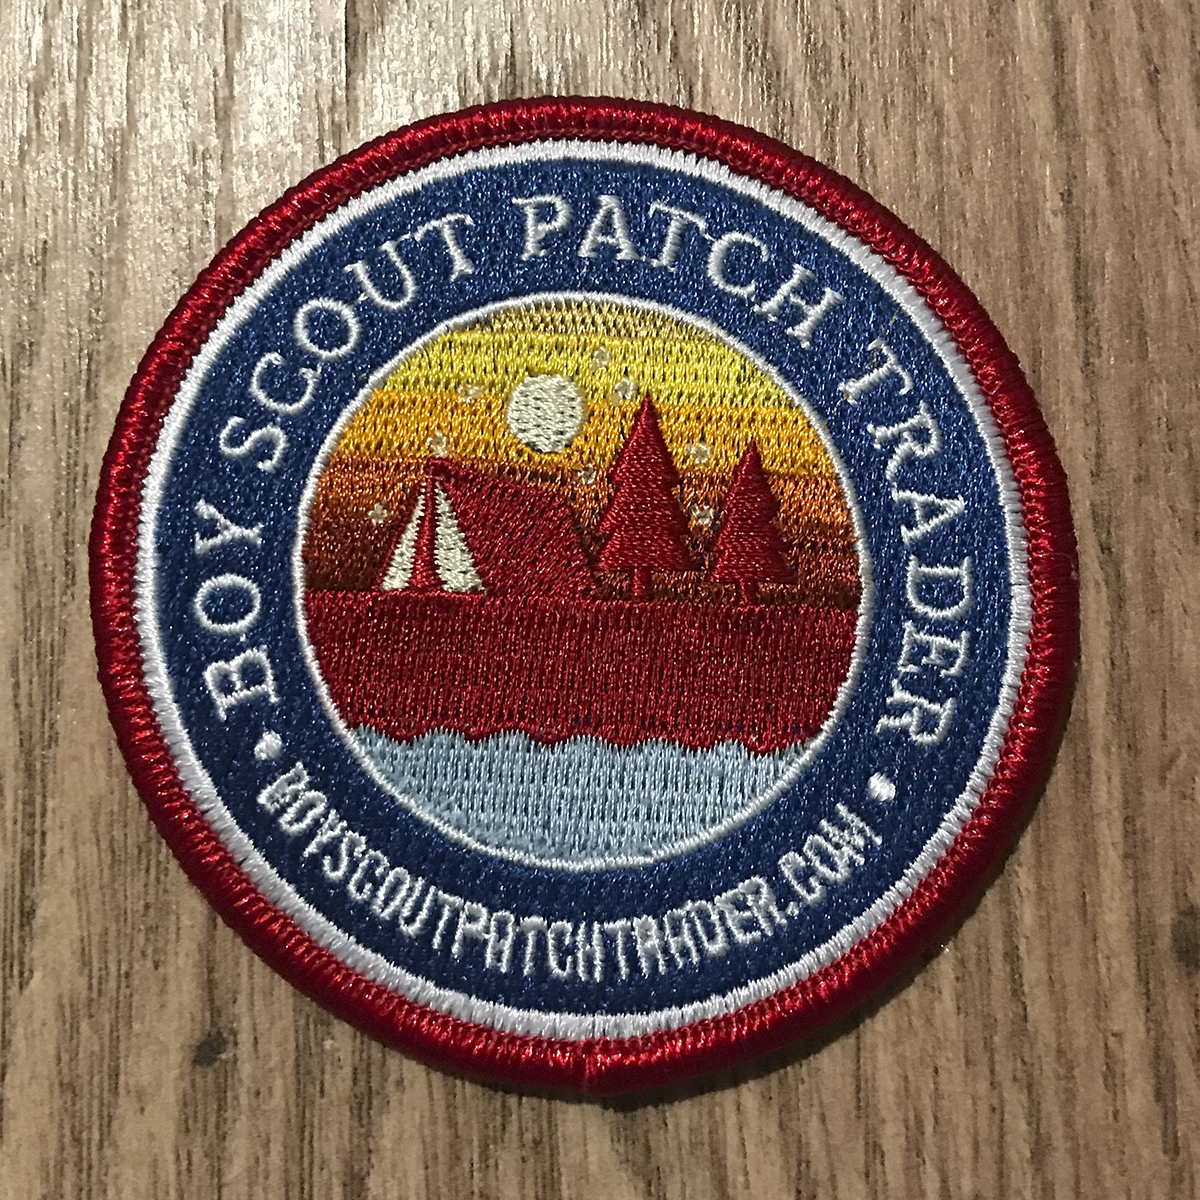 Scout patches –